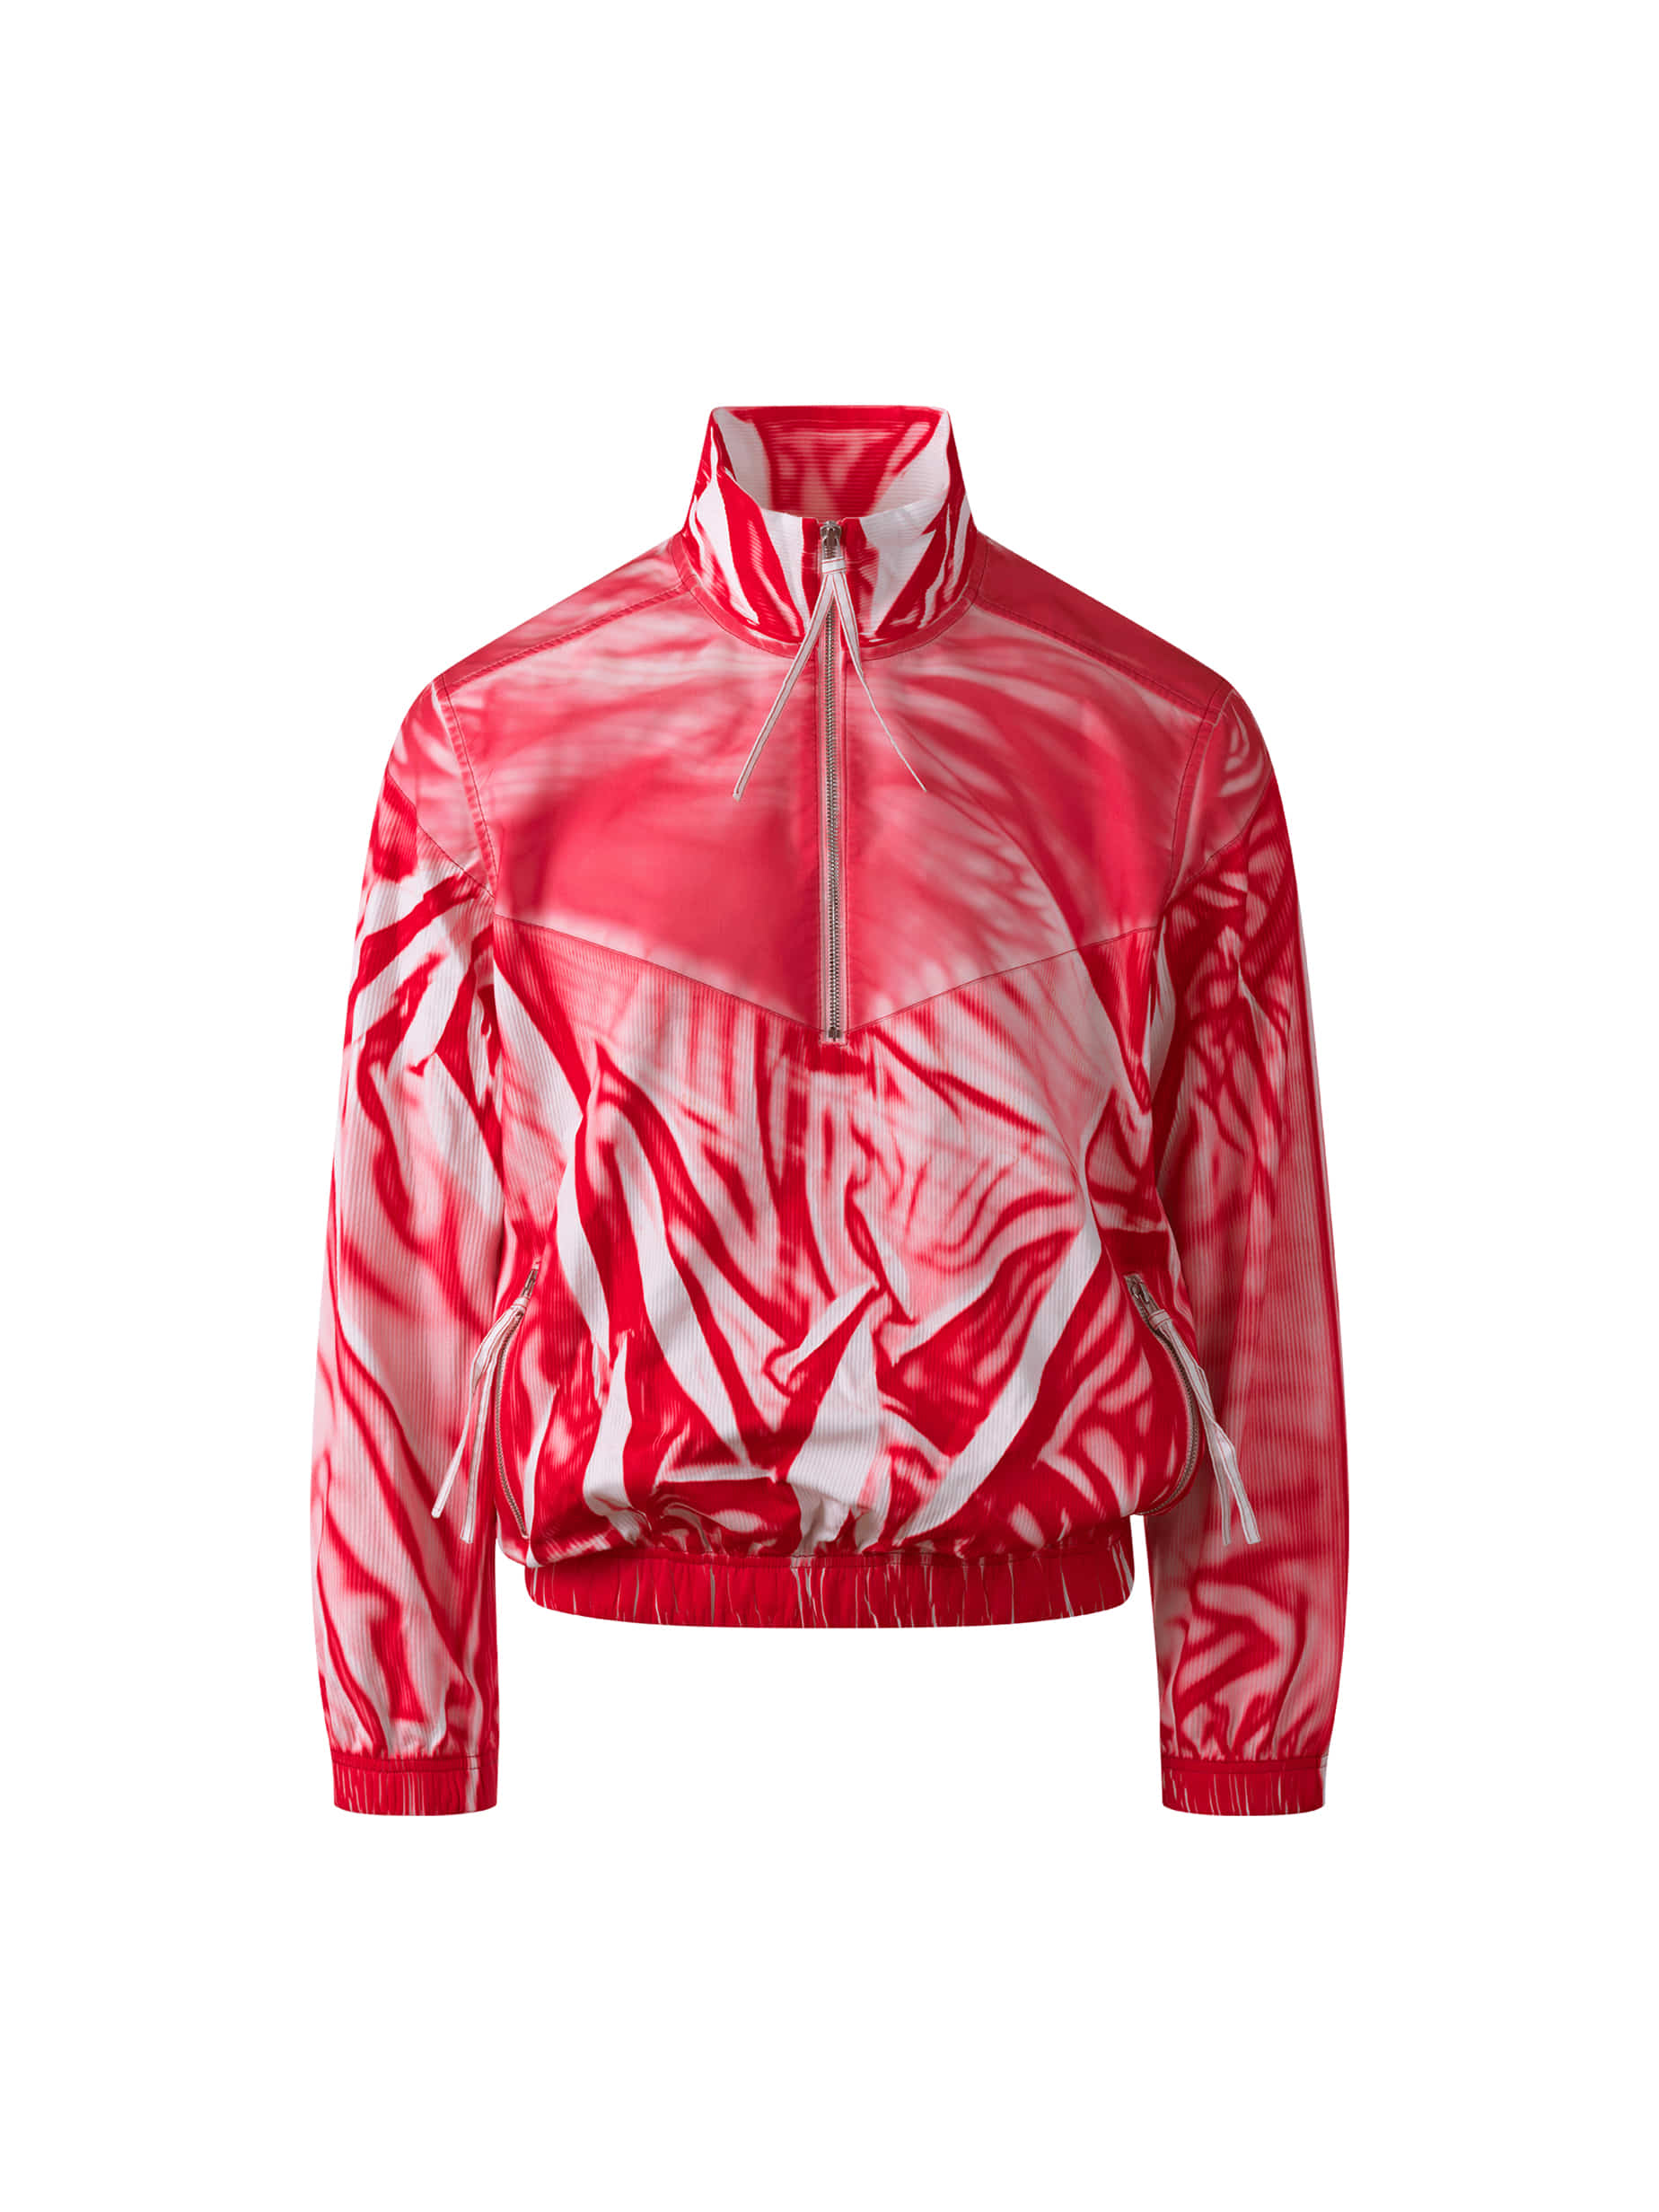 WGS AIRBAG PATCHED JERSEY HALF ZIP JUMPER RED PRINT